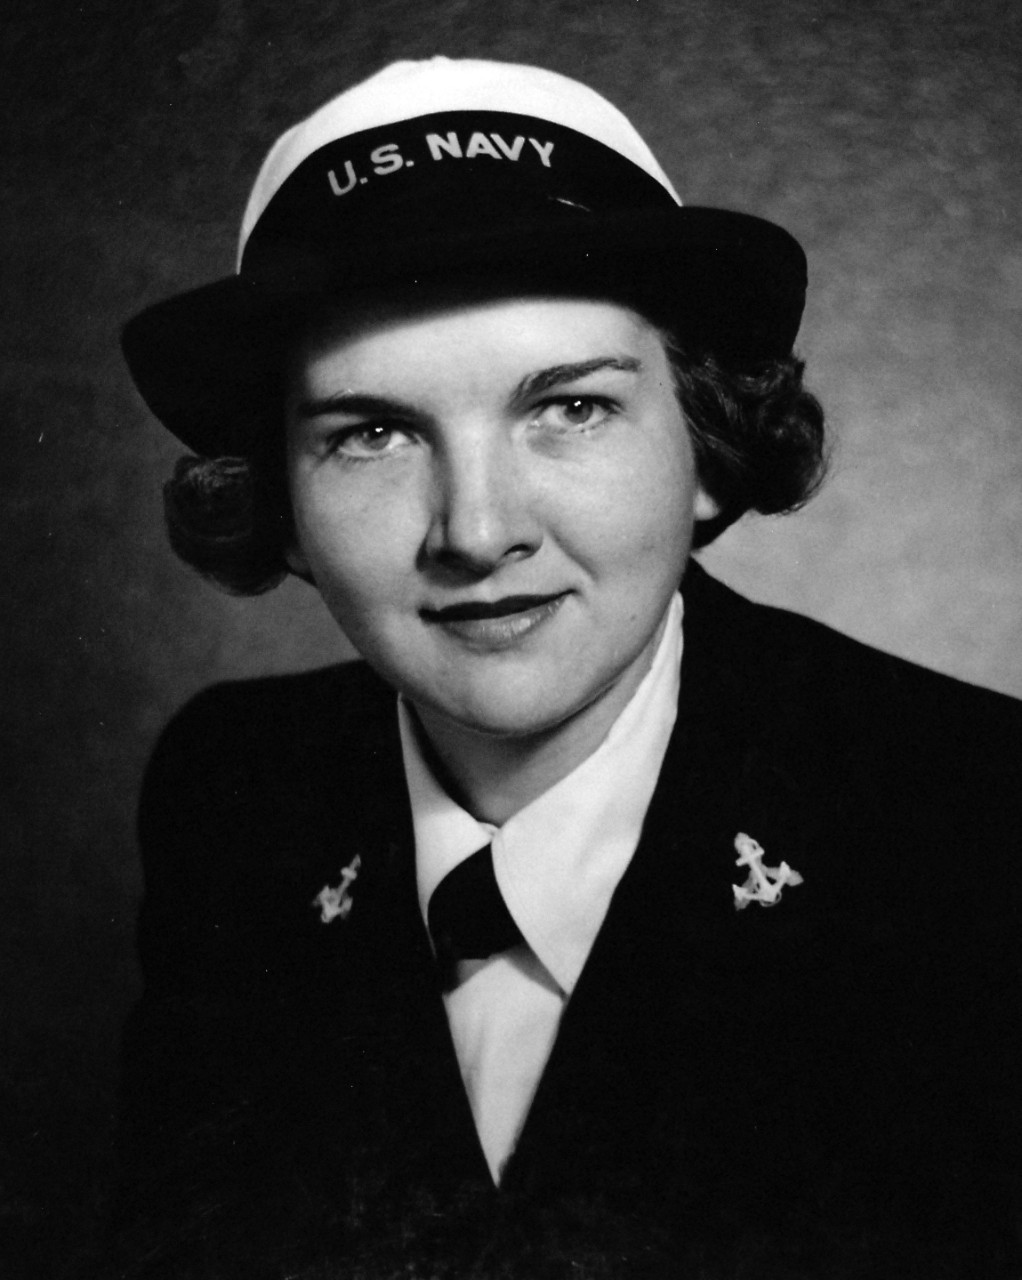 80-G-41568:   Yeoman Third Class Ruby Gale Chisler, USNR, May 1943.   Chisler was one of the first two enlisted women selected for officer training in the Women’s Reserve, is a graduate of Fairmont State College, Fairmont, West Virginia, and did graduate work there and at the North Carolina State College of Engineering in Raleigh, North Carolina.  Before enlisting, she was an art teacher in Elizabeth City, North Carolina; Monogalla County, West Virginia; and Alliance, Ohio.  Photograph released May 20, 1943.  Official U.S. Navy Photograph, now in the collections of the National Archives. 